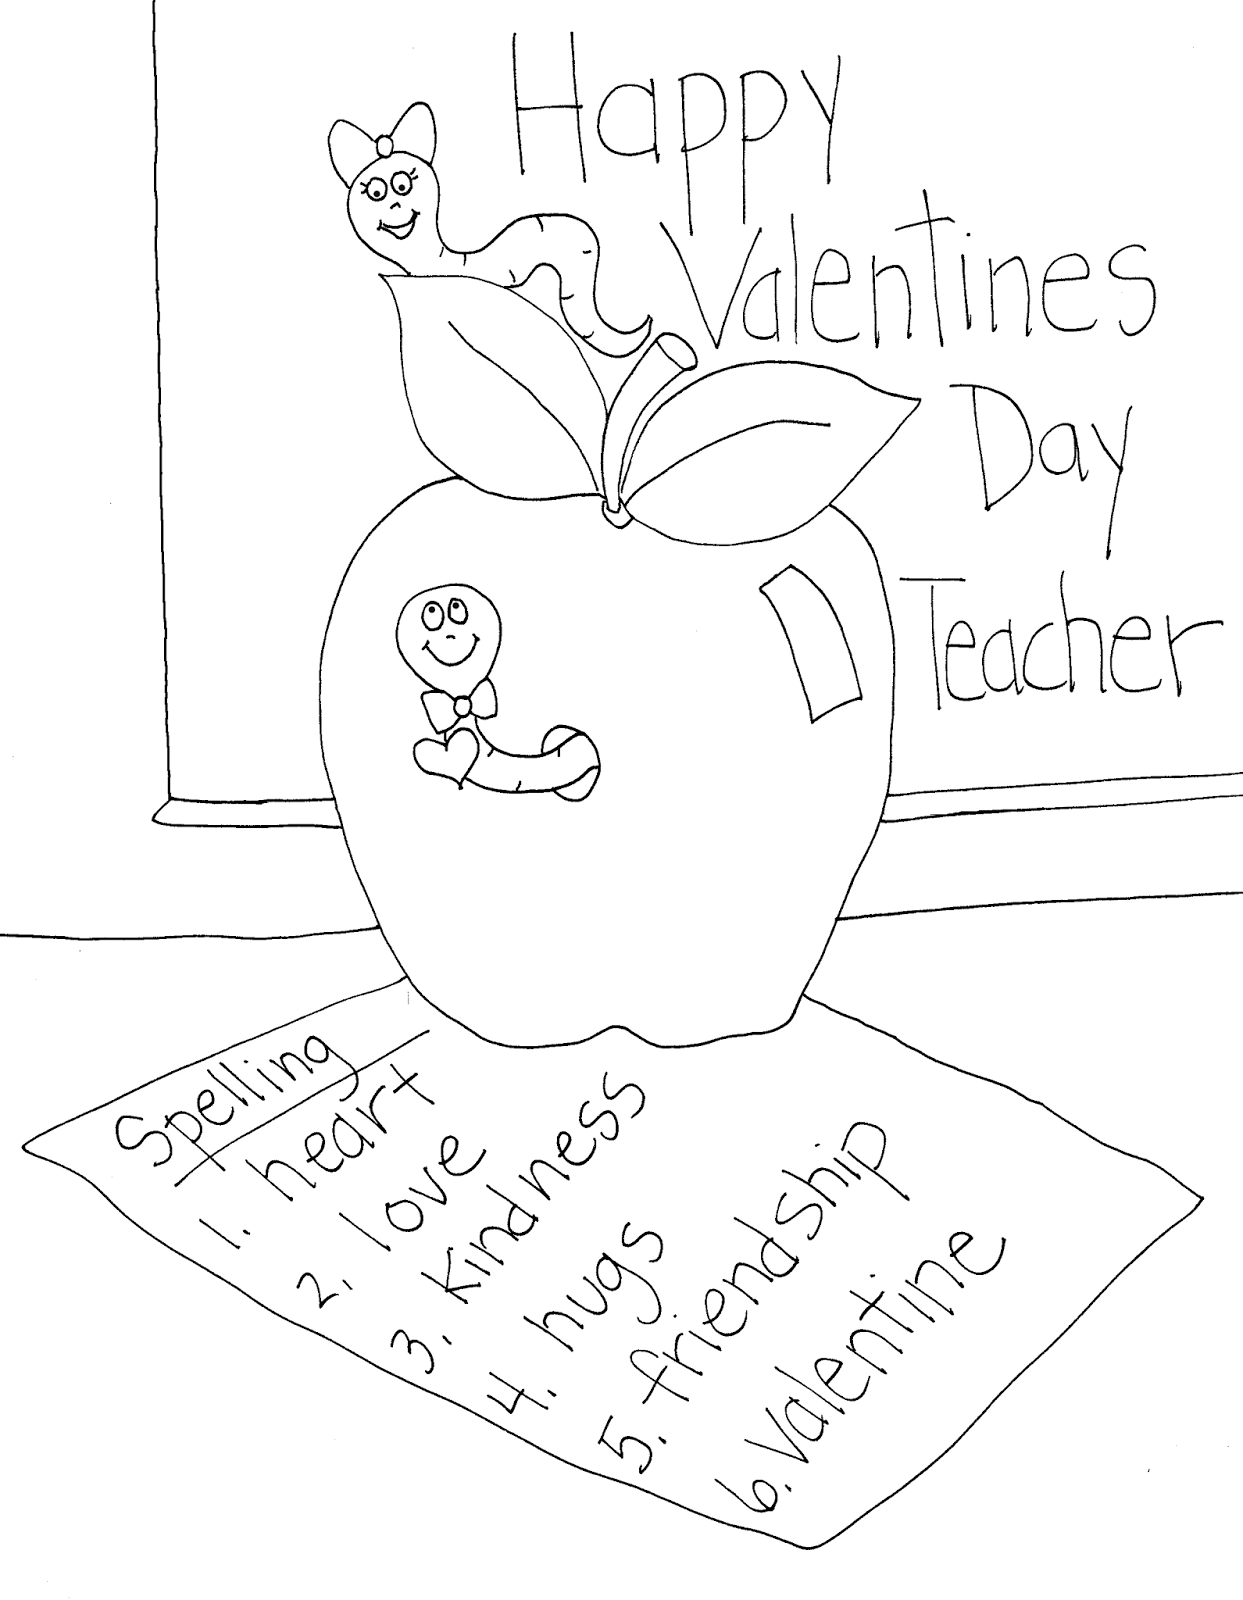 It's About Time, Teachers! A Valentine for the Teacher